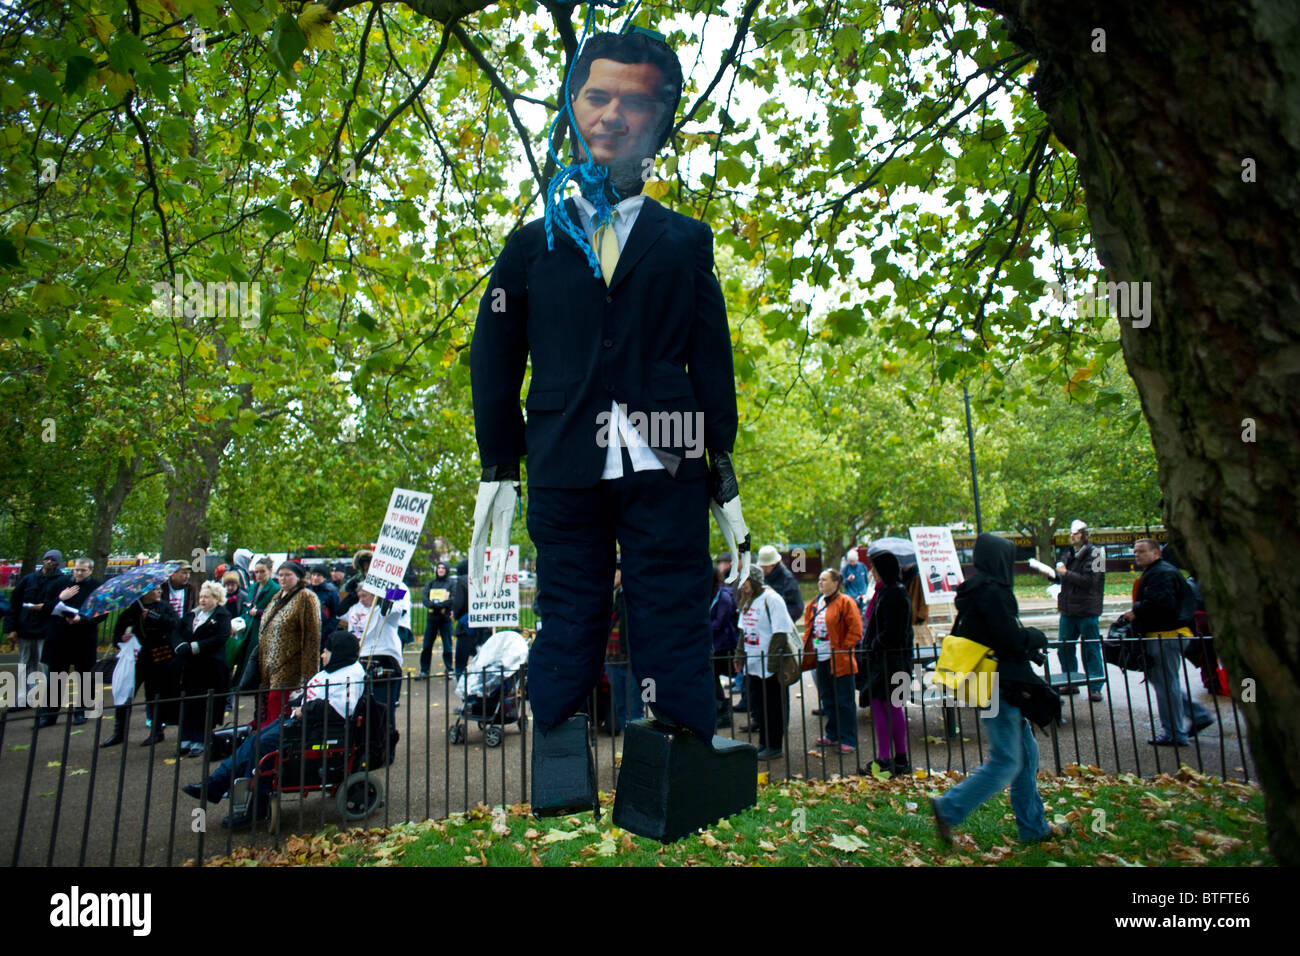 Effigy of George Osborne being hanged as a protest against UK government spending cuts Stock Photo